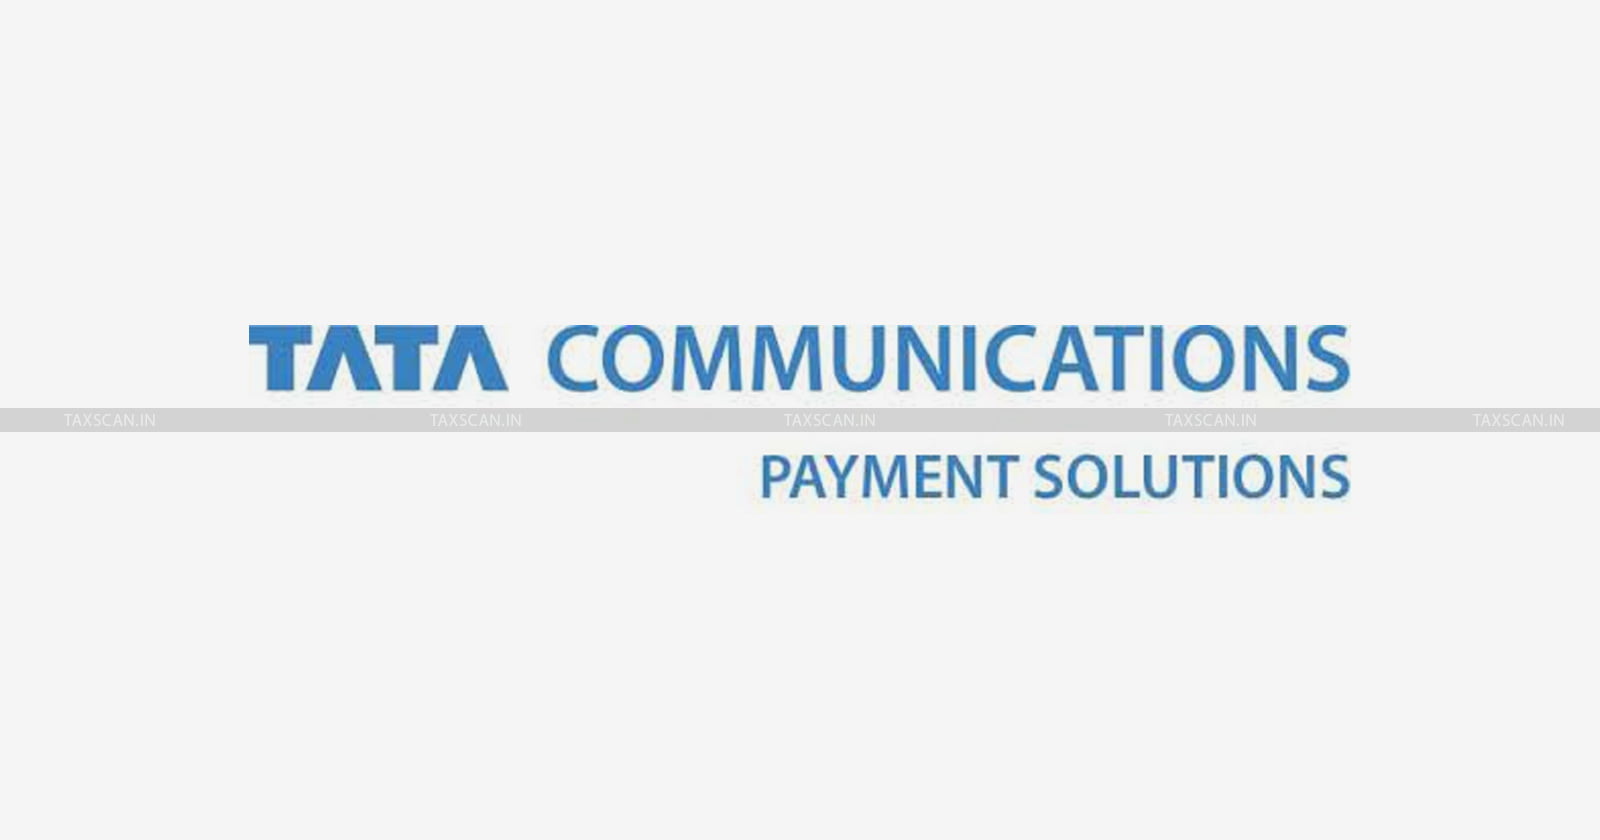 Tata Communications Payment Solutions - Tata Communications - Bombay HC - ATM - Tax Recovery - Tax - taxscan